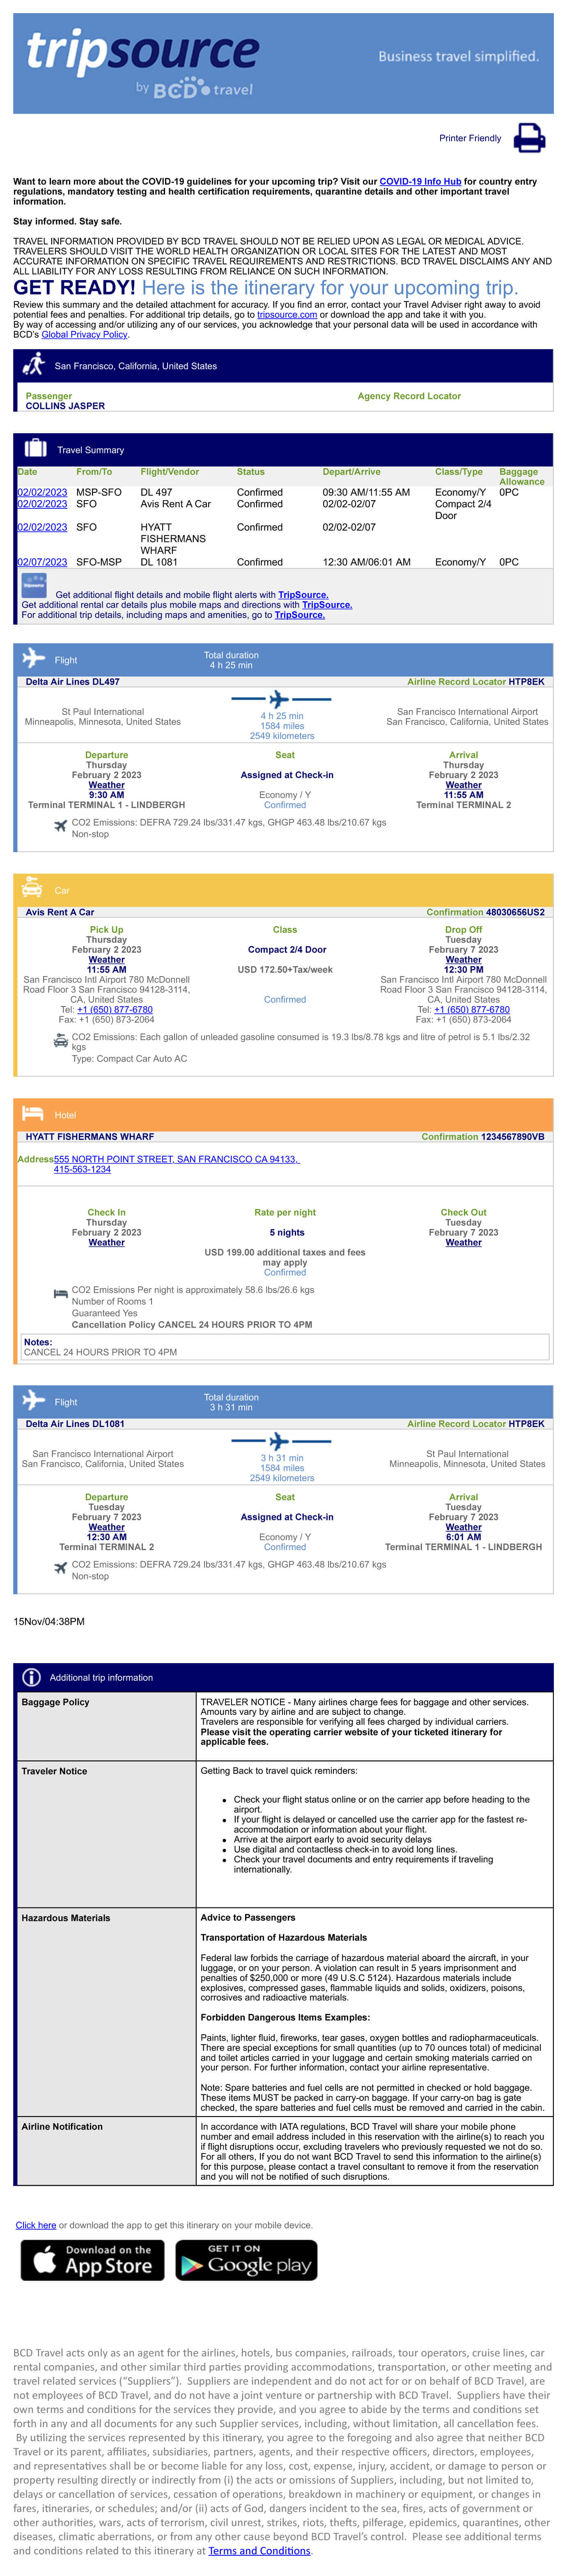 travel itinerary and receipt